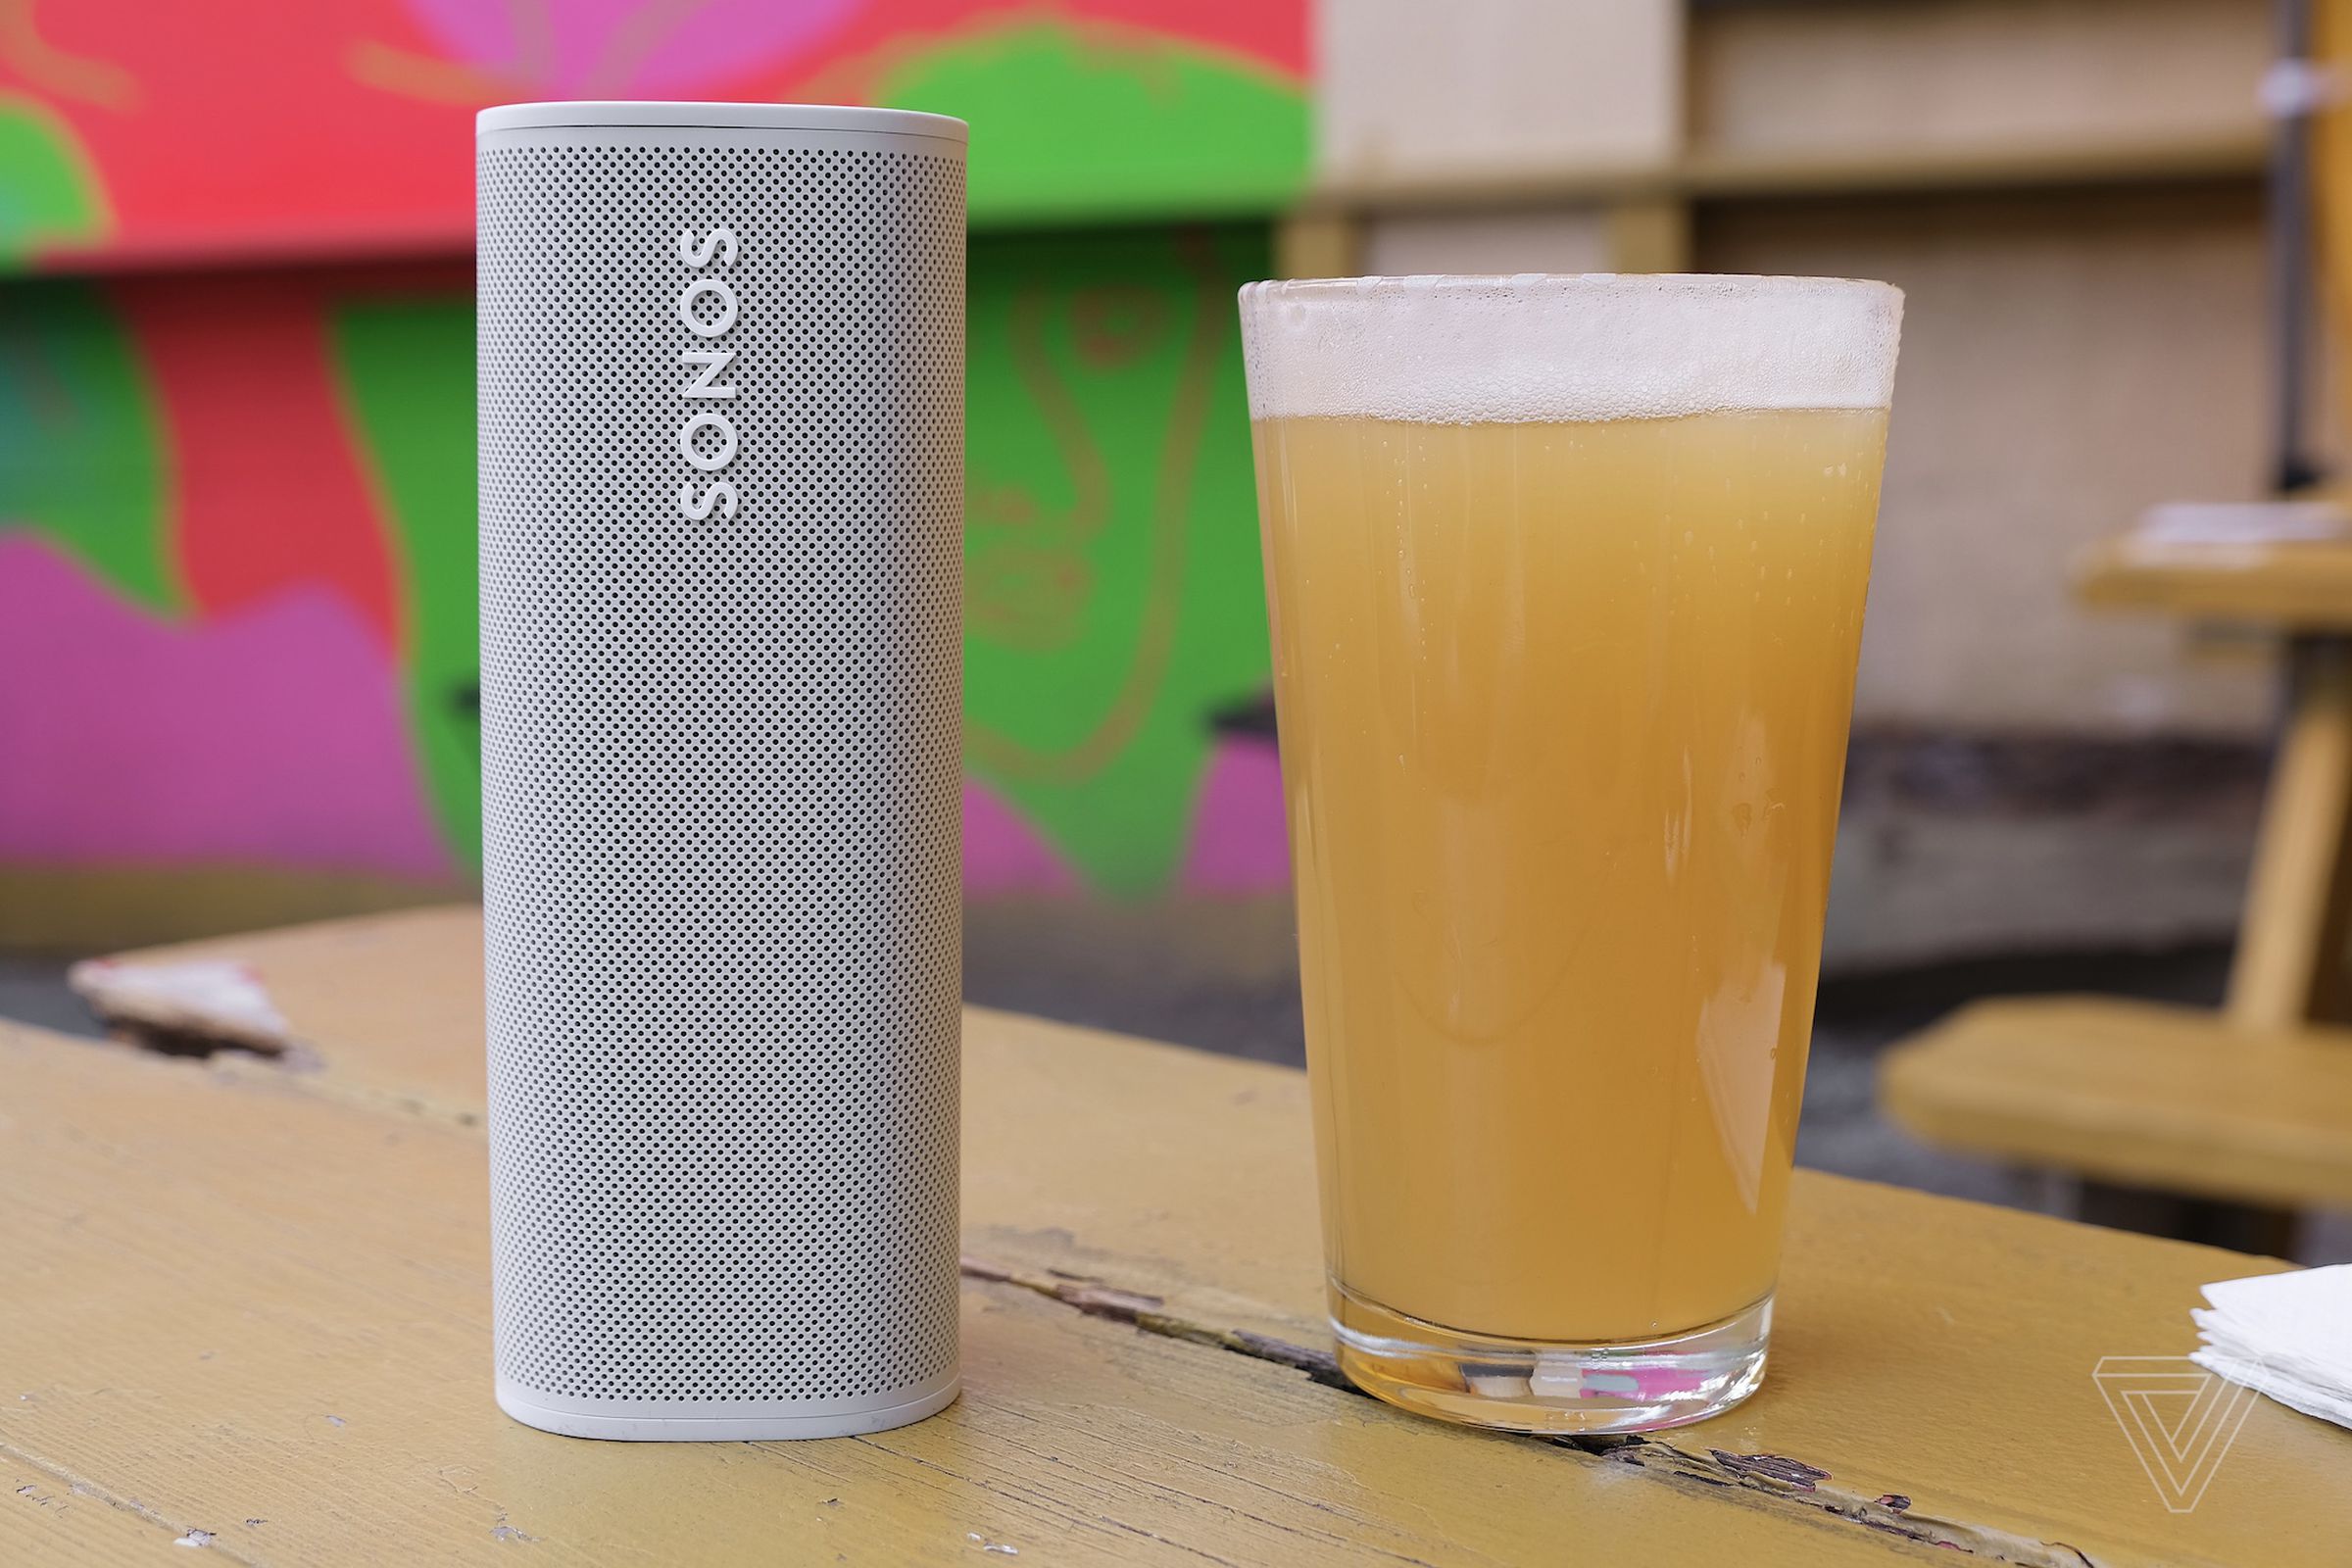 The small Sonos Roam is one of our favorite portable Bluetooth speakers.